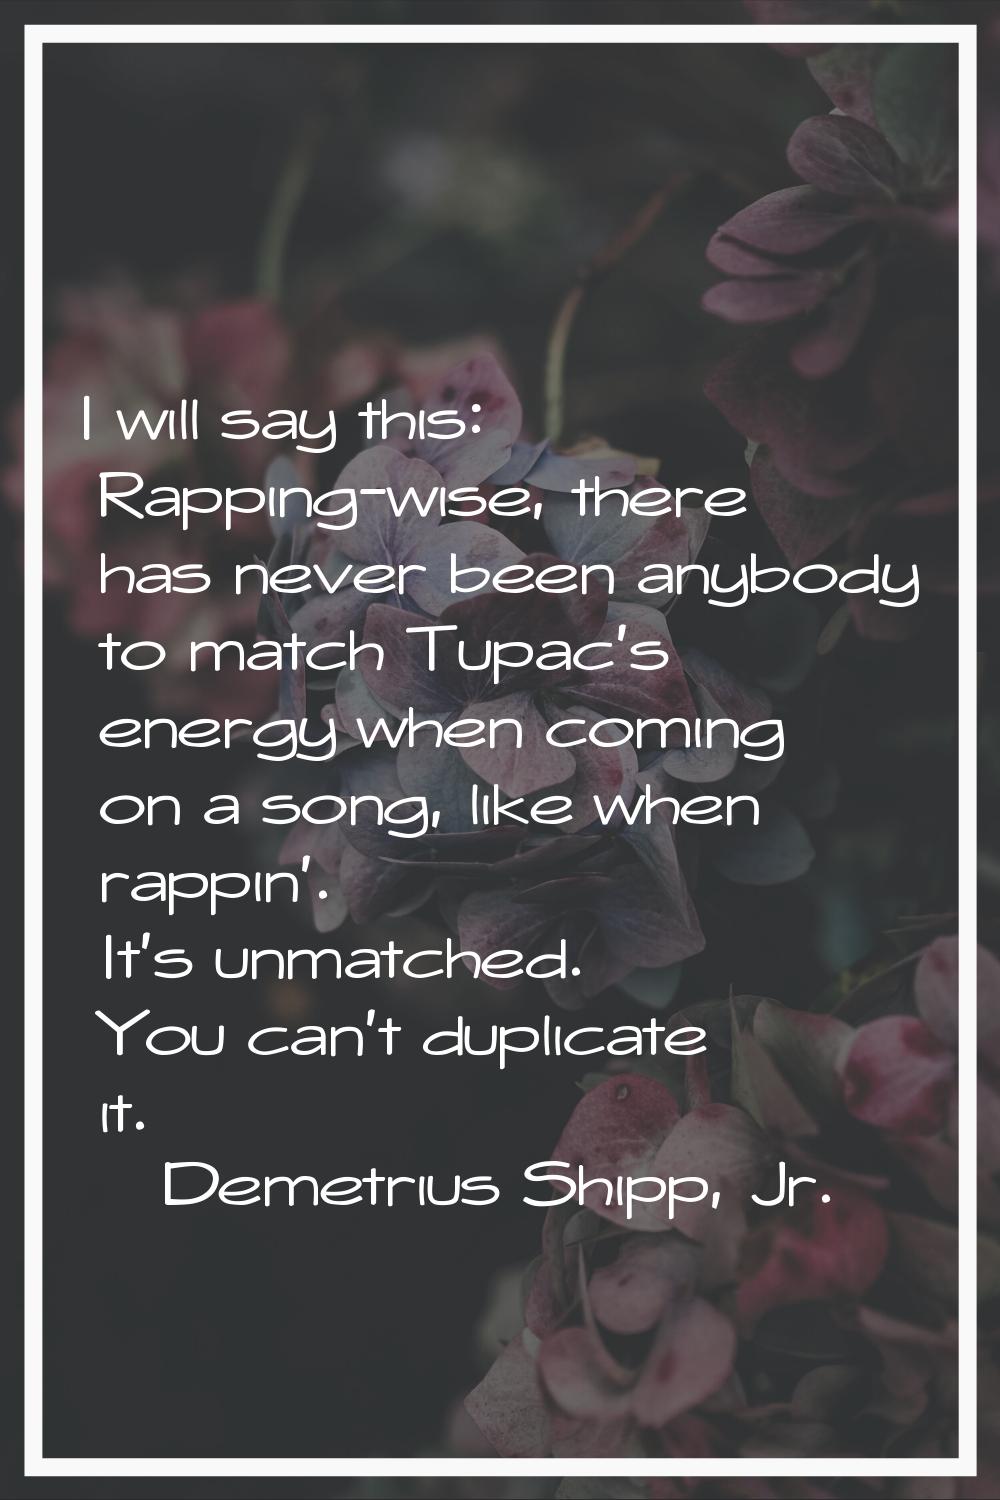 I will say this: Rapping-wise, there has never been anybody to match Tupac's energy when coming on 